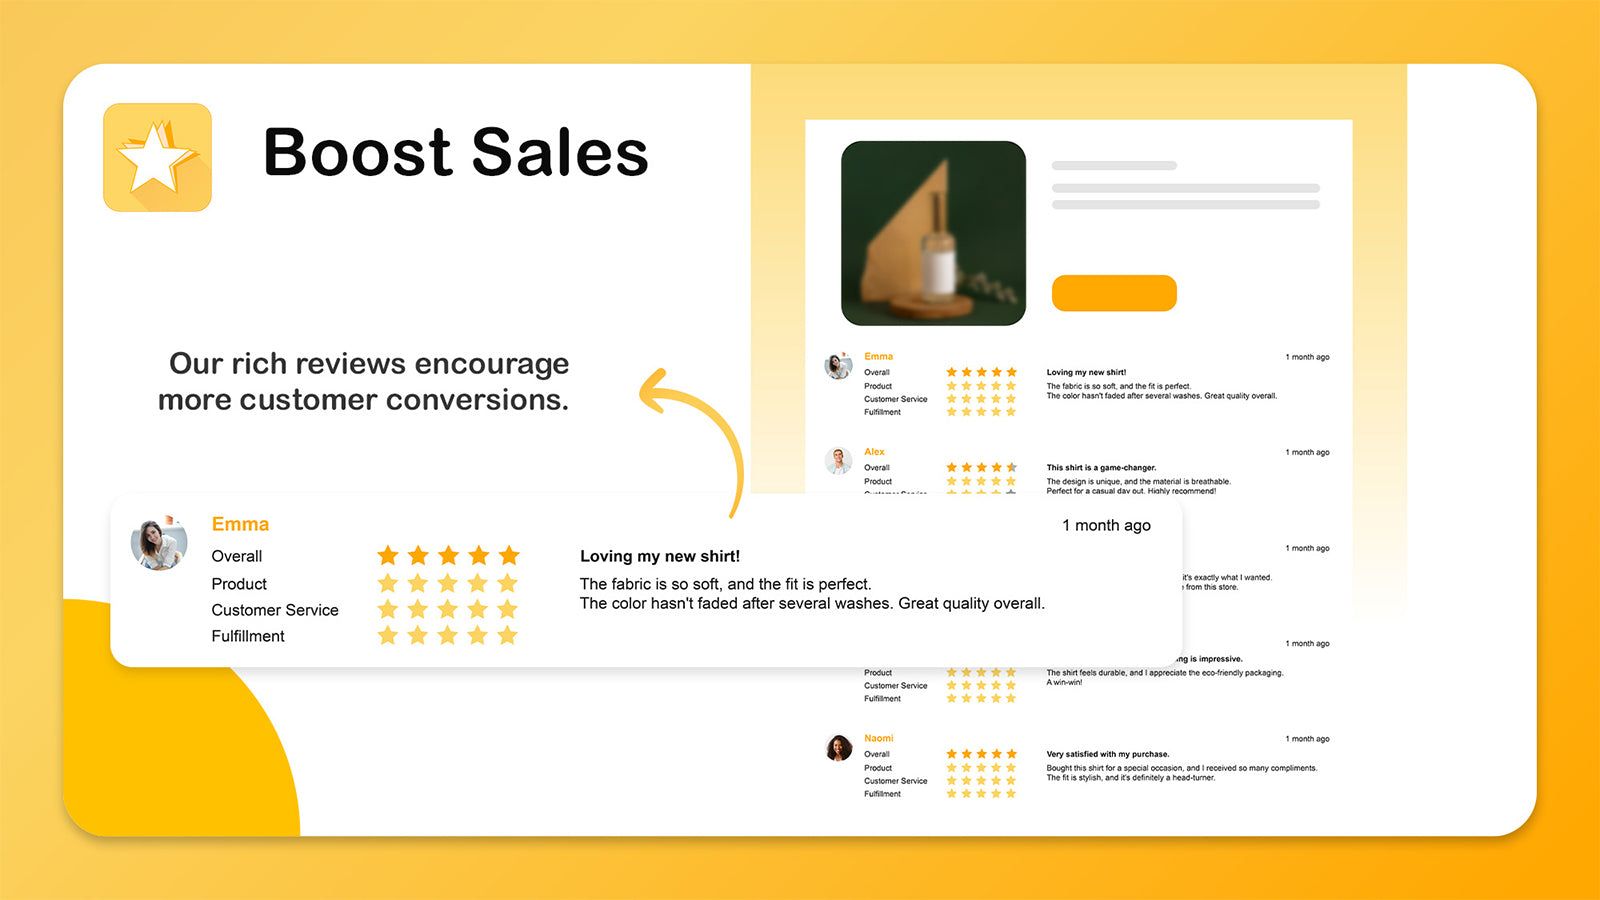 Boost Sales with Rich Reviews